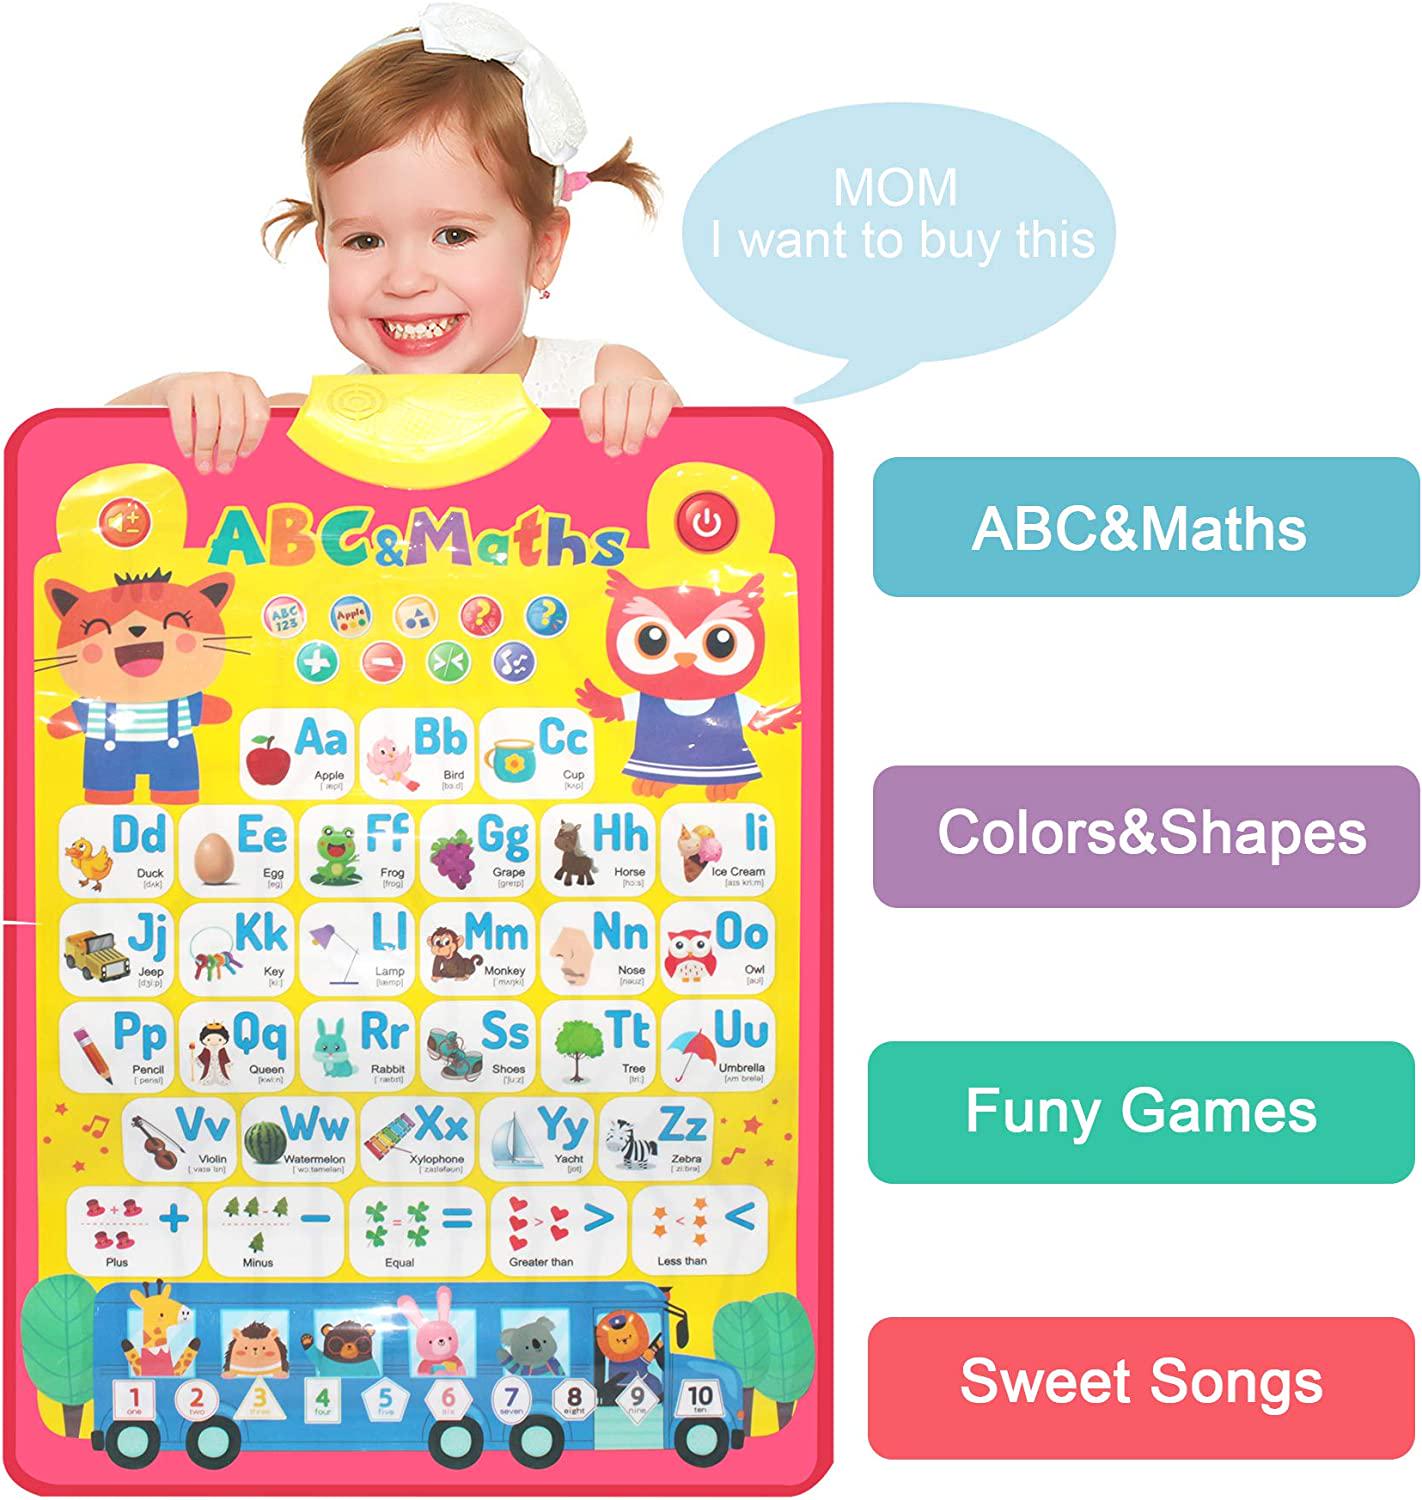 KRXONVIY, KRXONVIY Alphabet Wall Chart ABC&Maths Music Talking Poster Educational Toys Learning Baby Enlightenment Early Education Toy for Boys and Girls